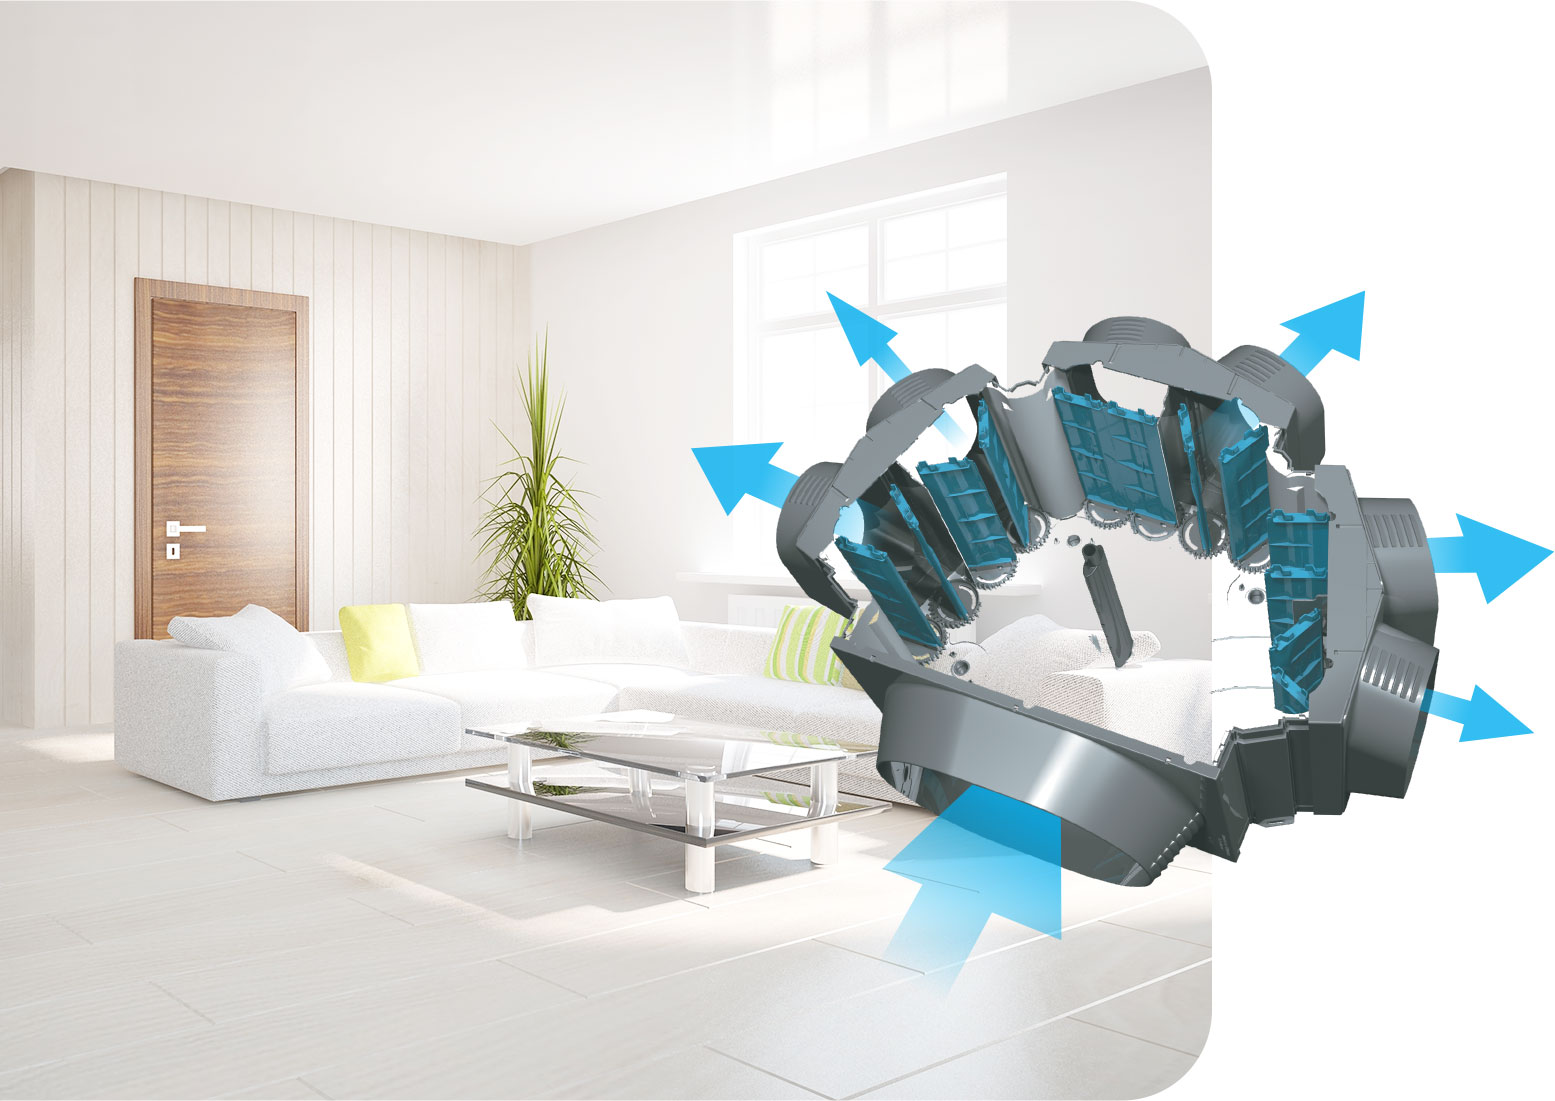 airflow system diagram to demonstrate how air travels in rooms like lounge room